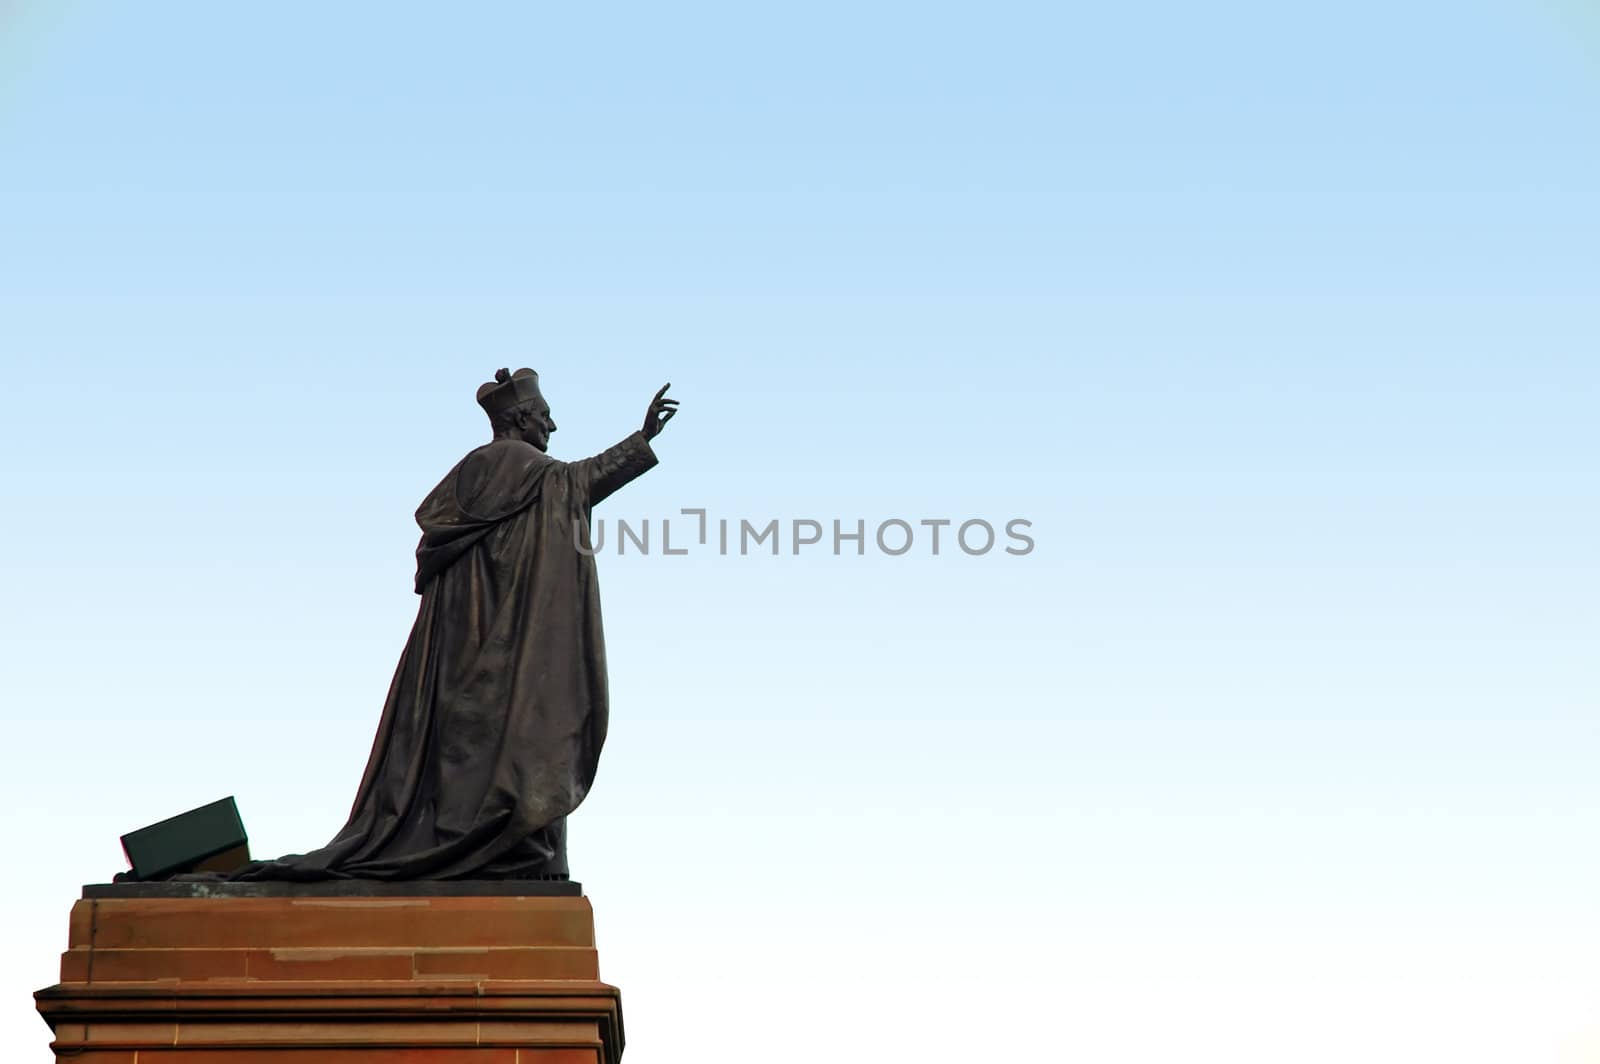 dark grey pope sculpture with one hand lifted up, sculpture is on brown stand, light blue sky, 